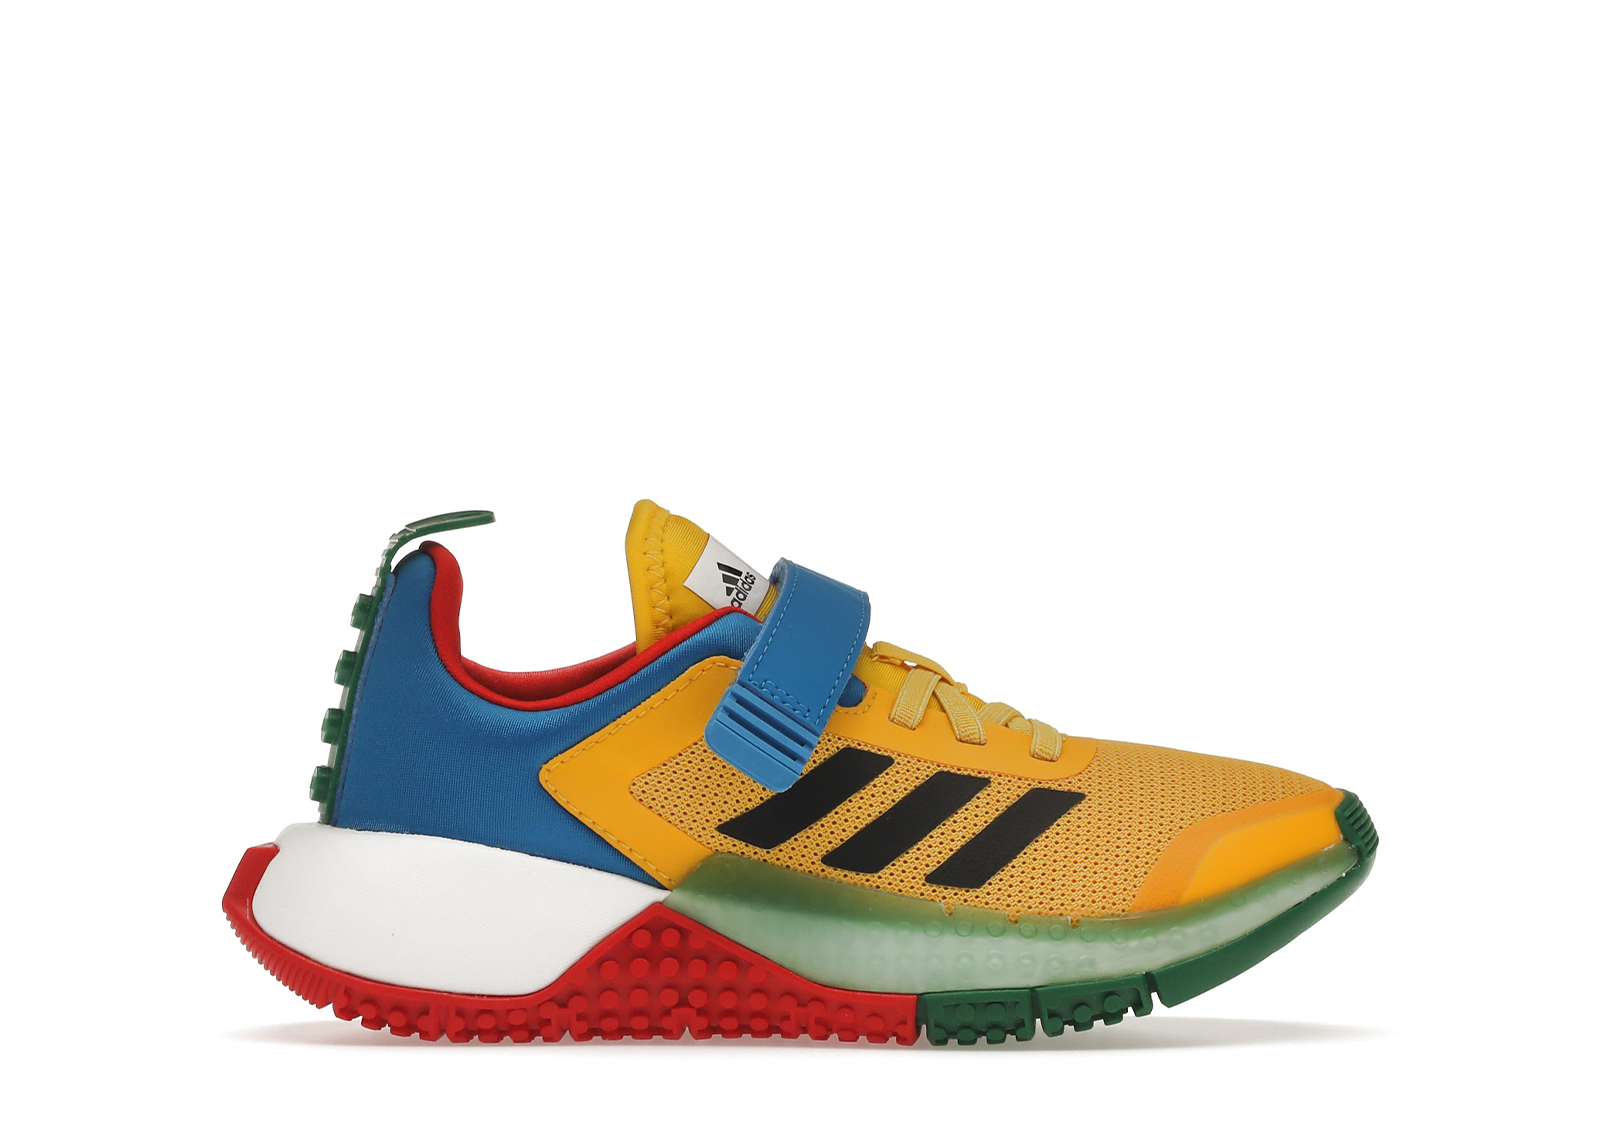 lego adidas shoes for sale